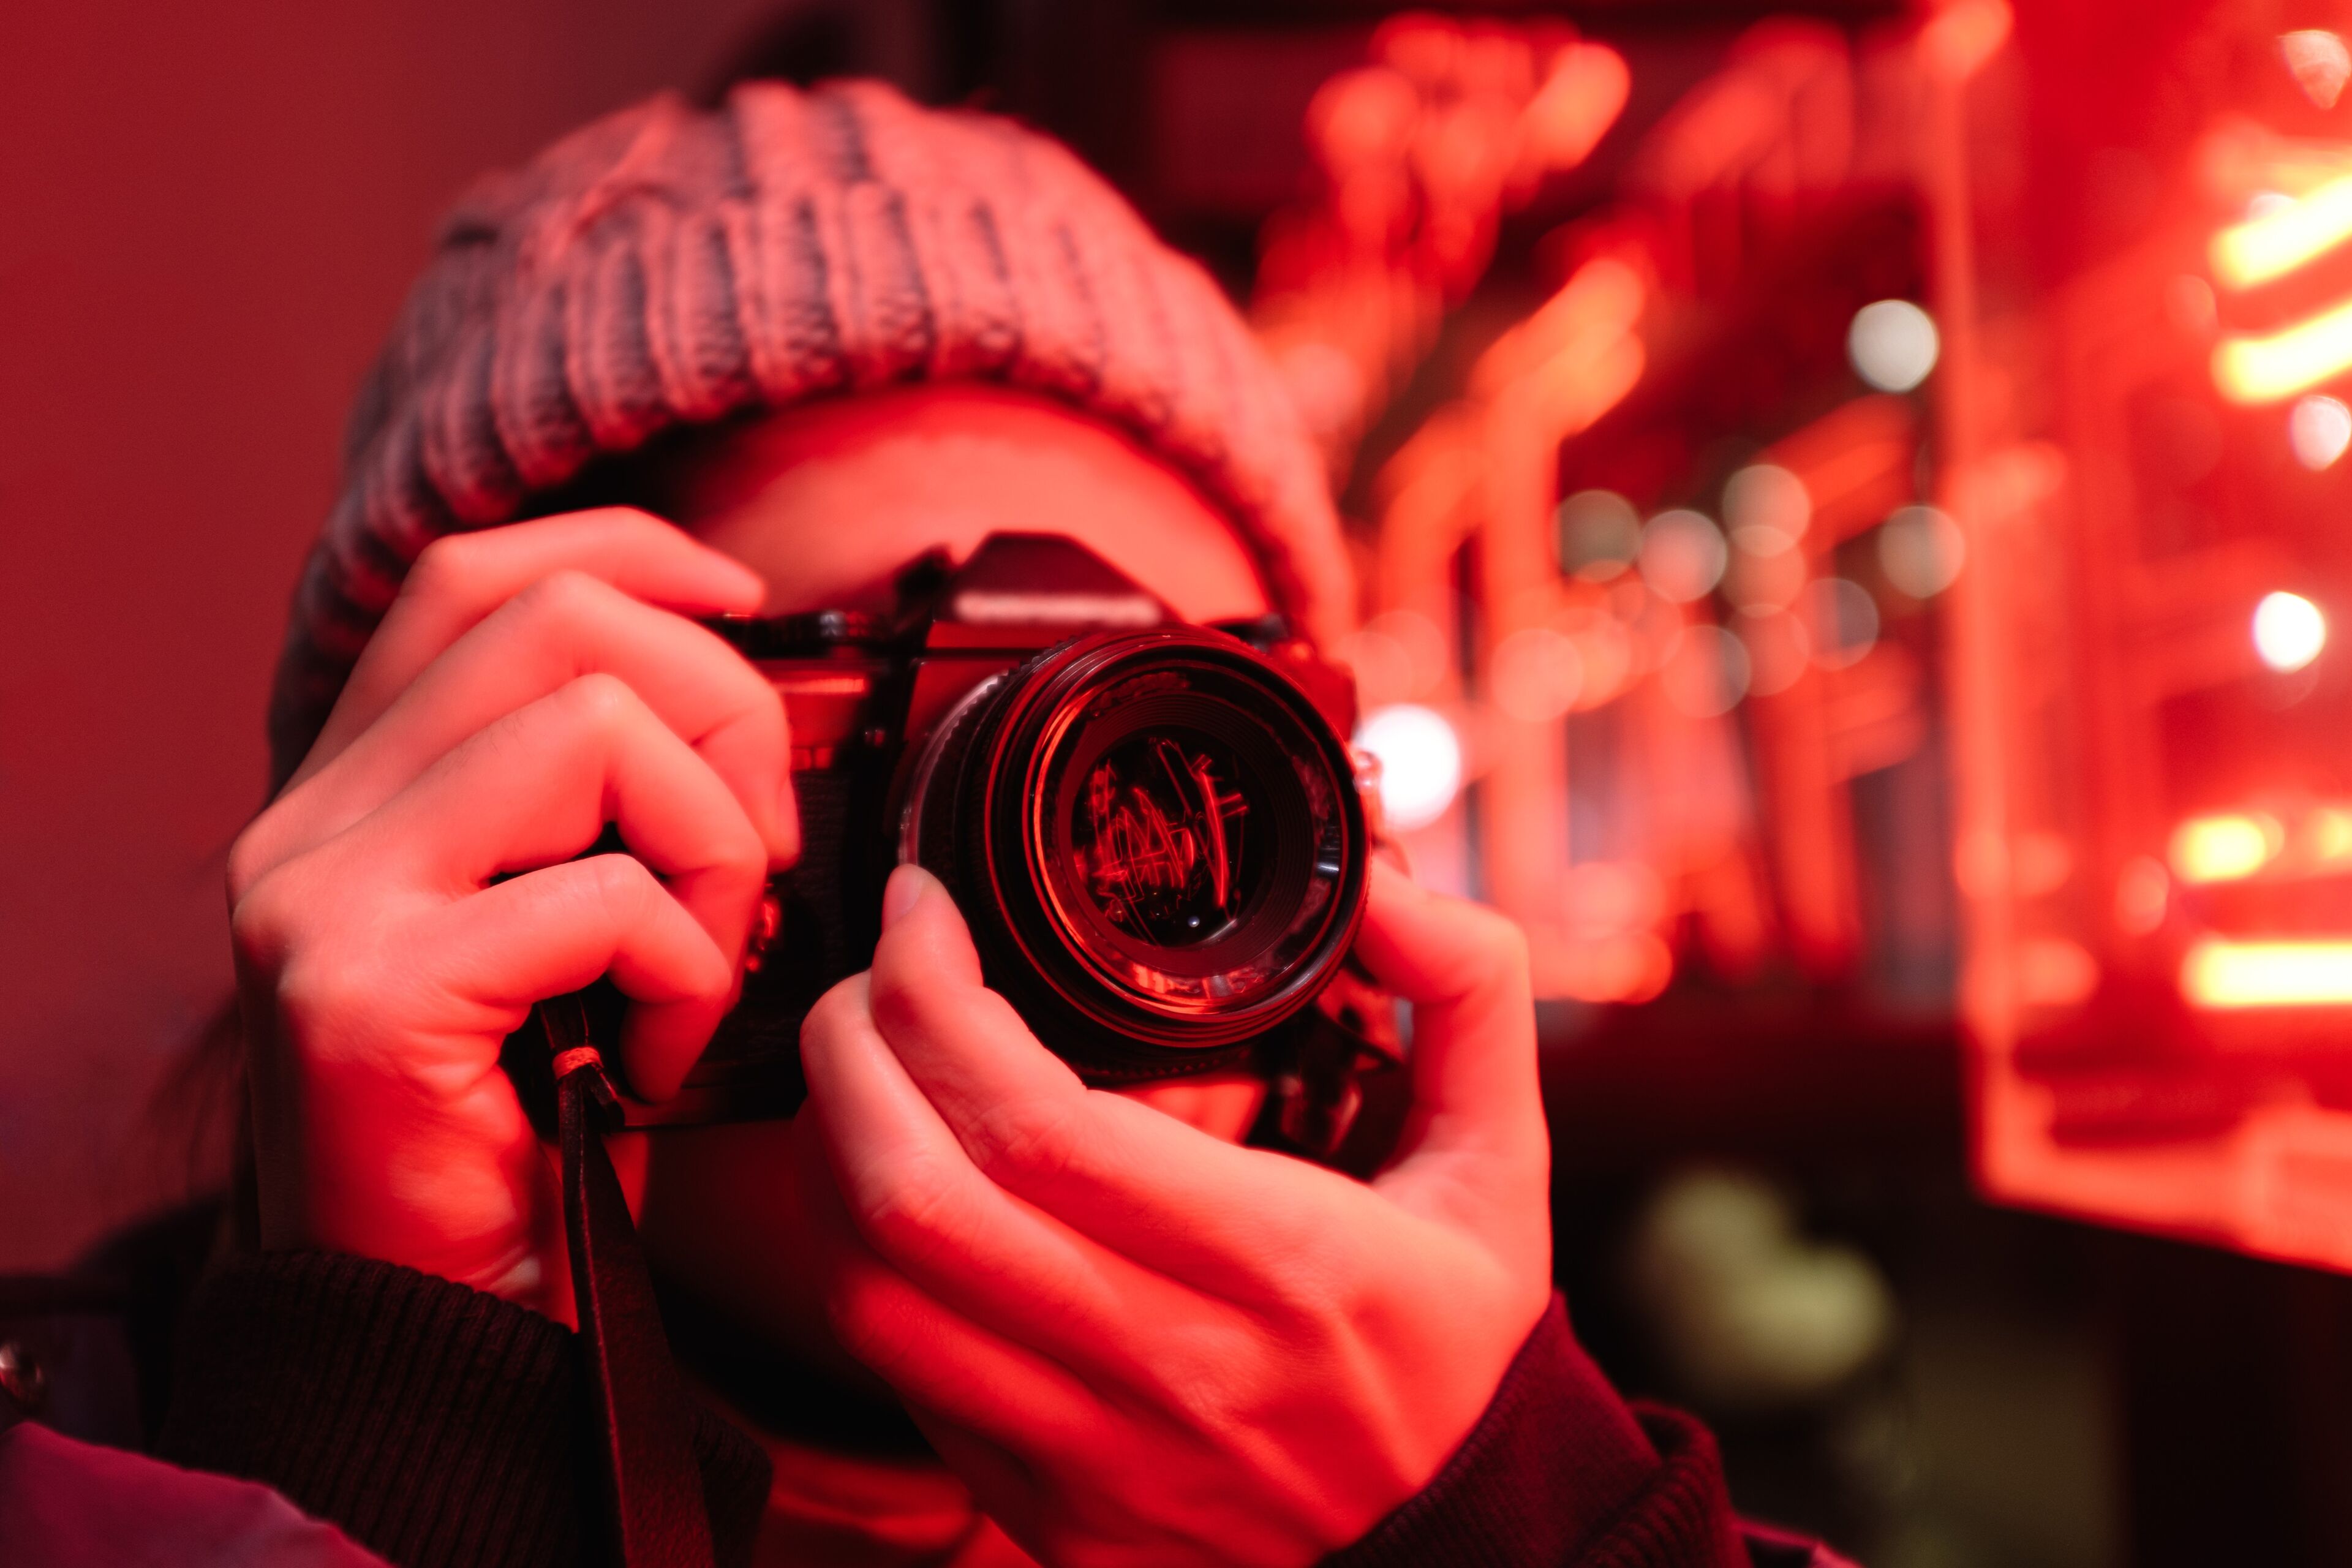 A person wearing a knit hat is taking a photo with a DSLR camera, illuminated by vibrant red neon lighting.